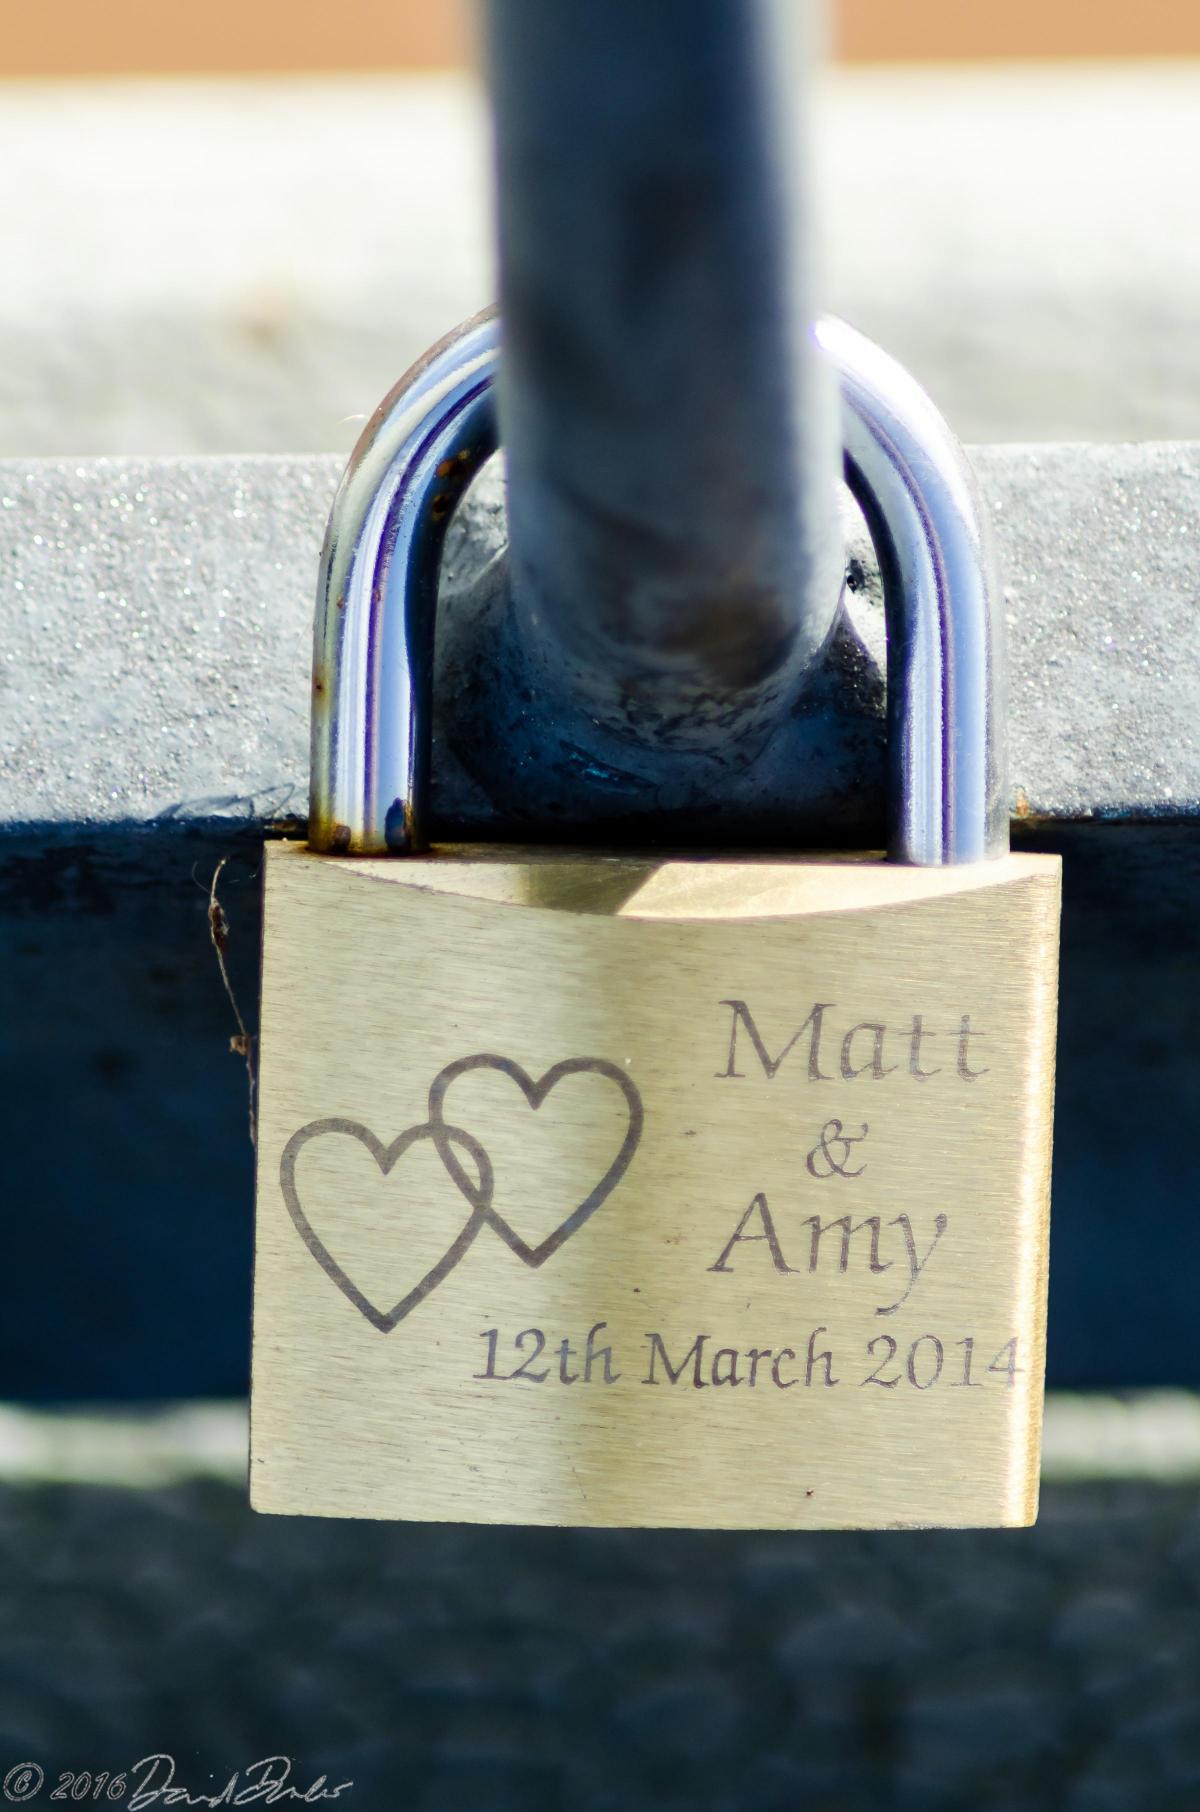 Two years on - are Matt and Amy still going strong?